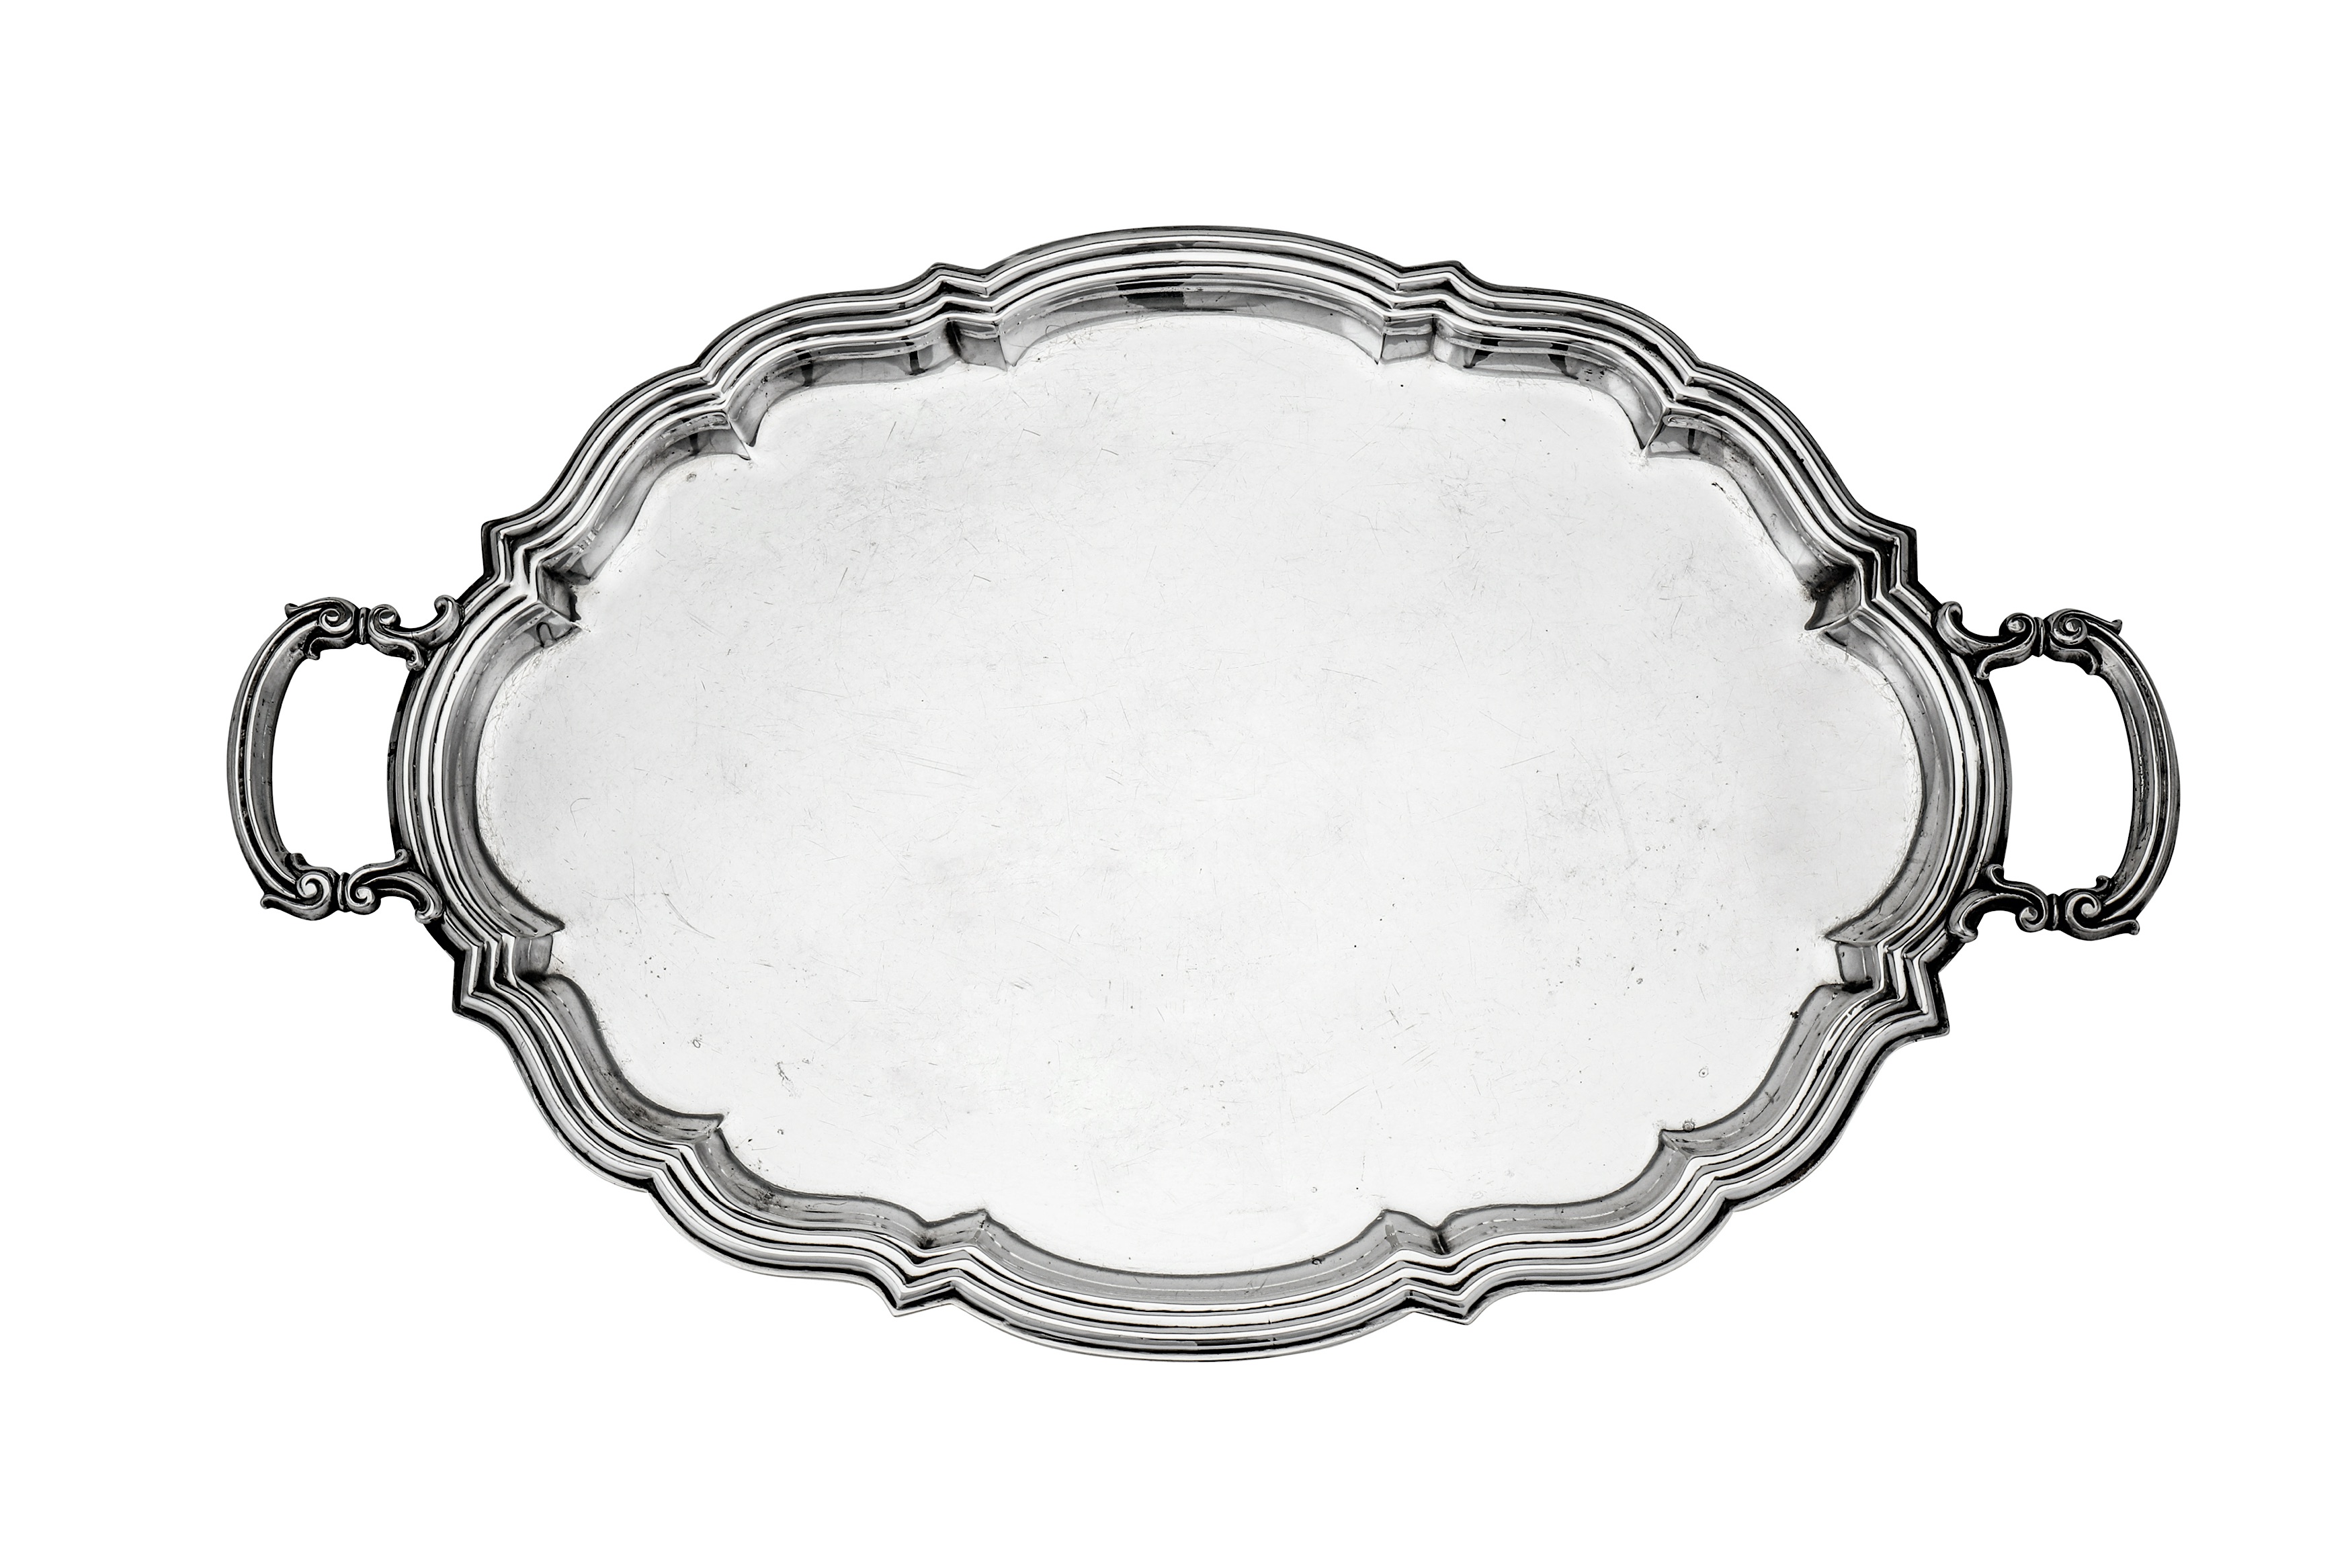 A late 19th / early 20th century Italian unmarked silver twin handled tray circa 1900